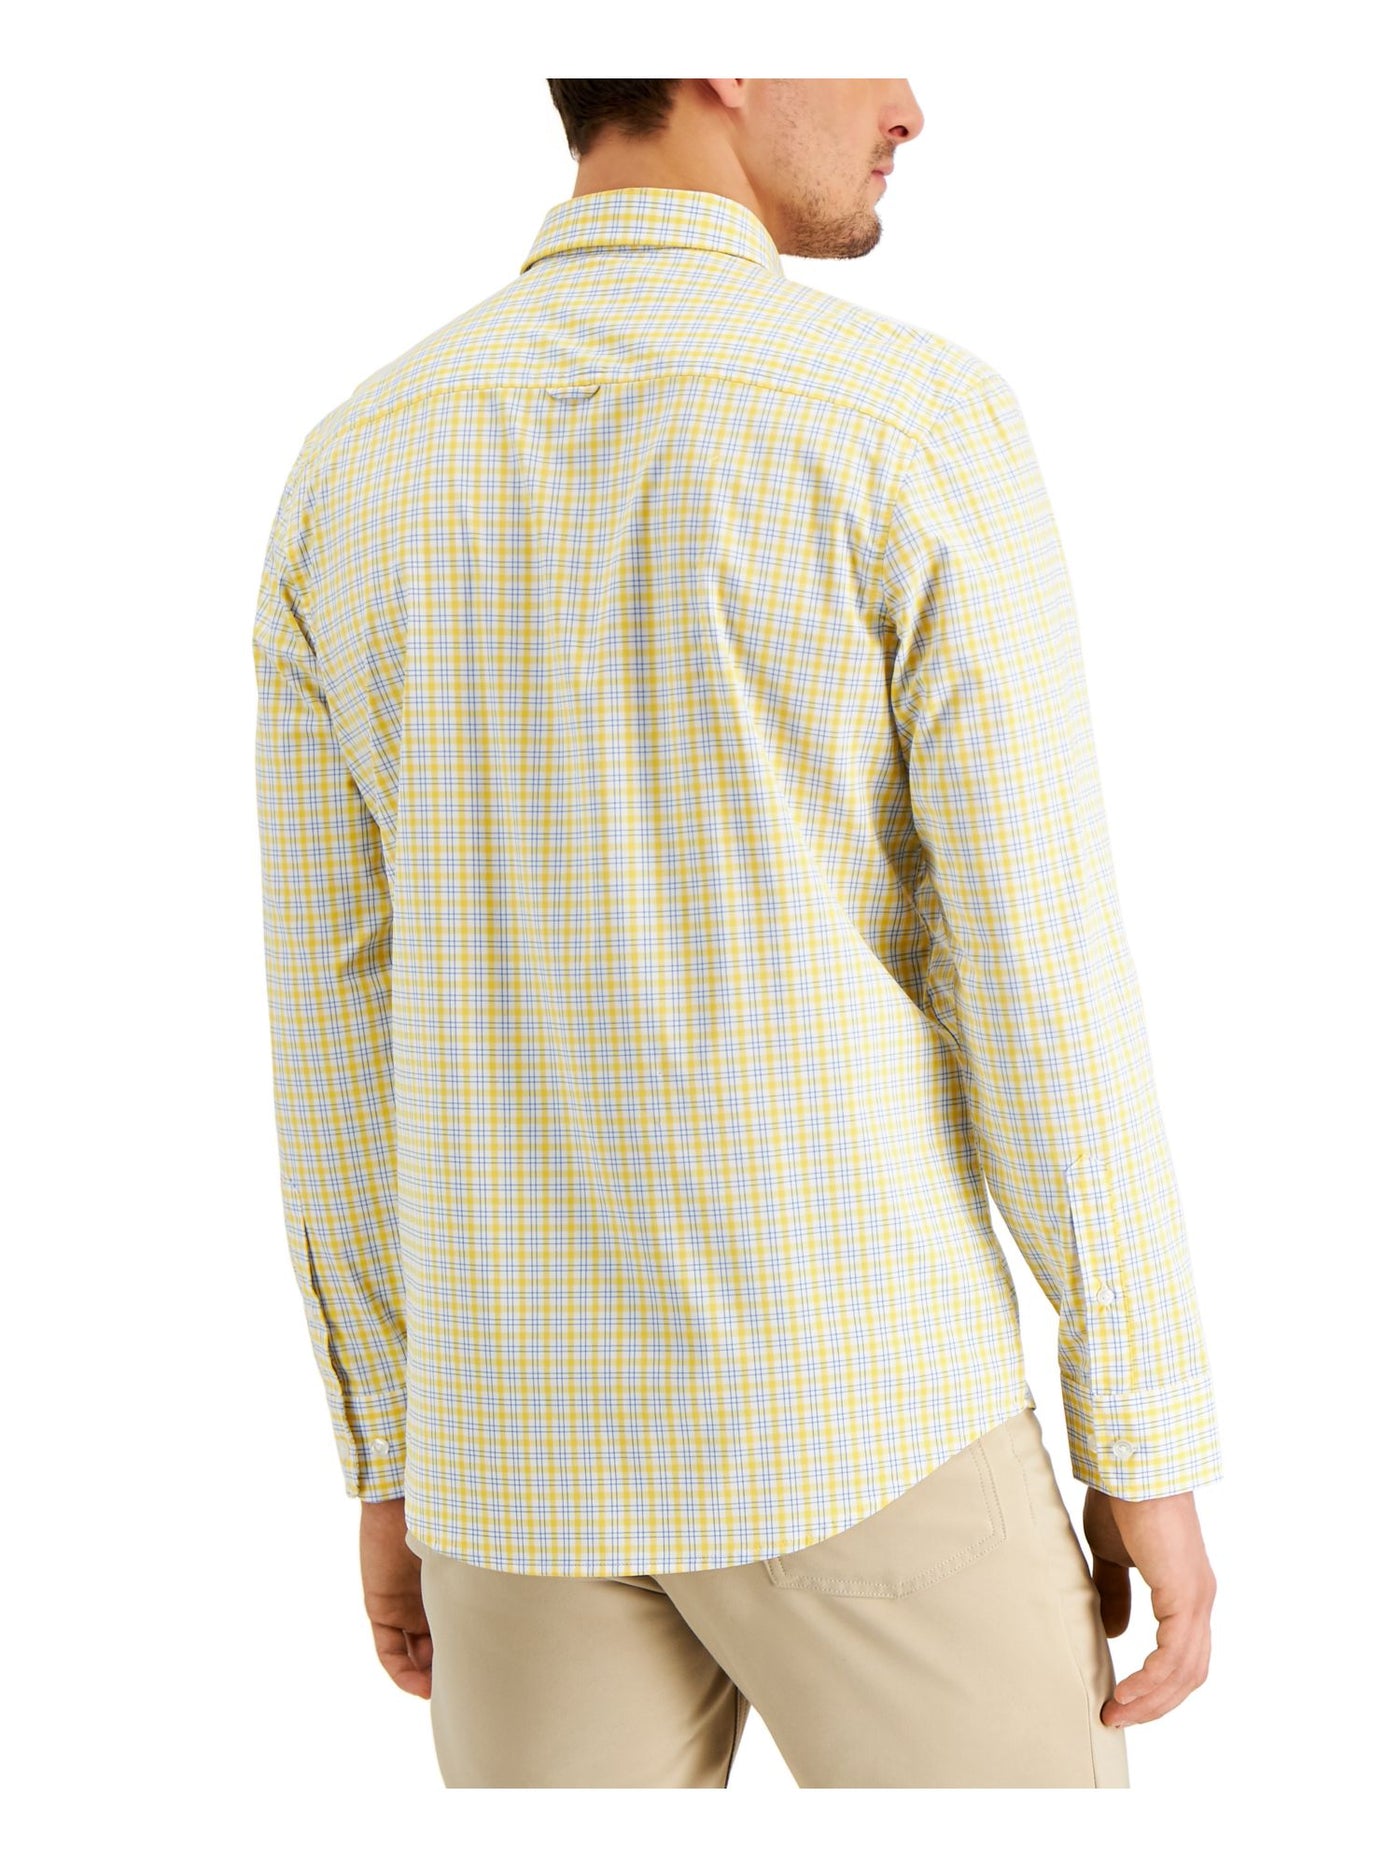 CLUBROOM Mens Yellow Lightweight, Pocket Plaid Classic Fit Button Down Performance Stretch Casual Shirt XL